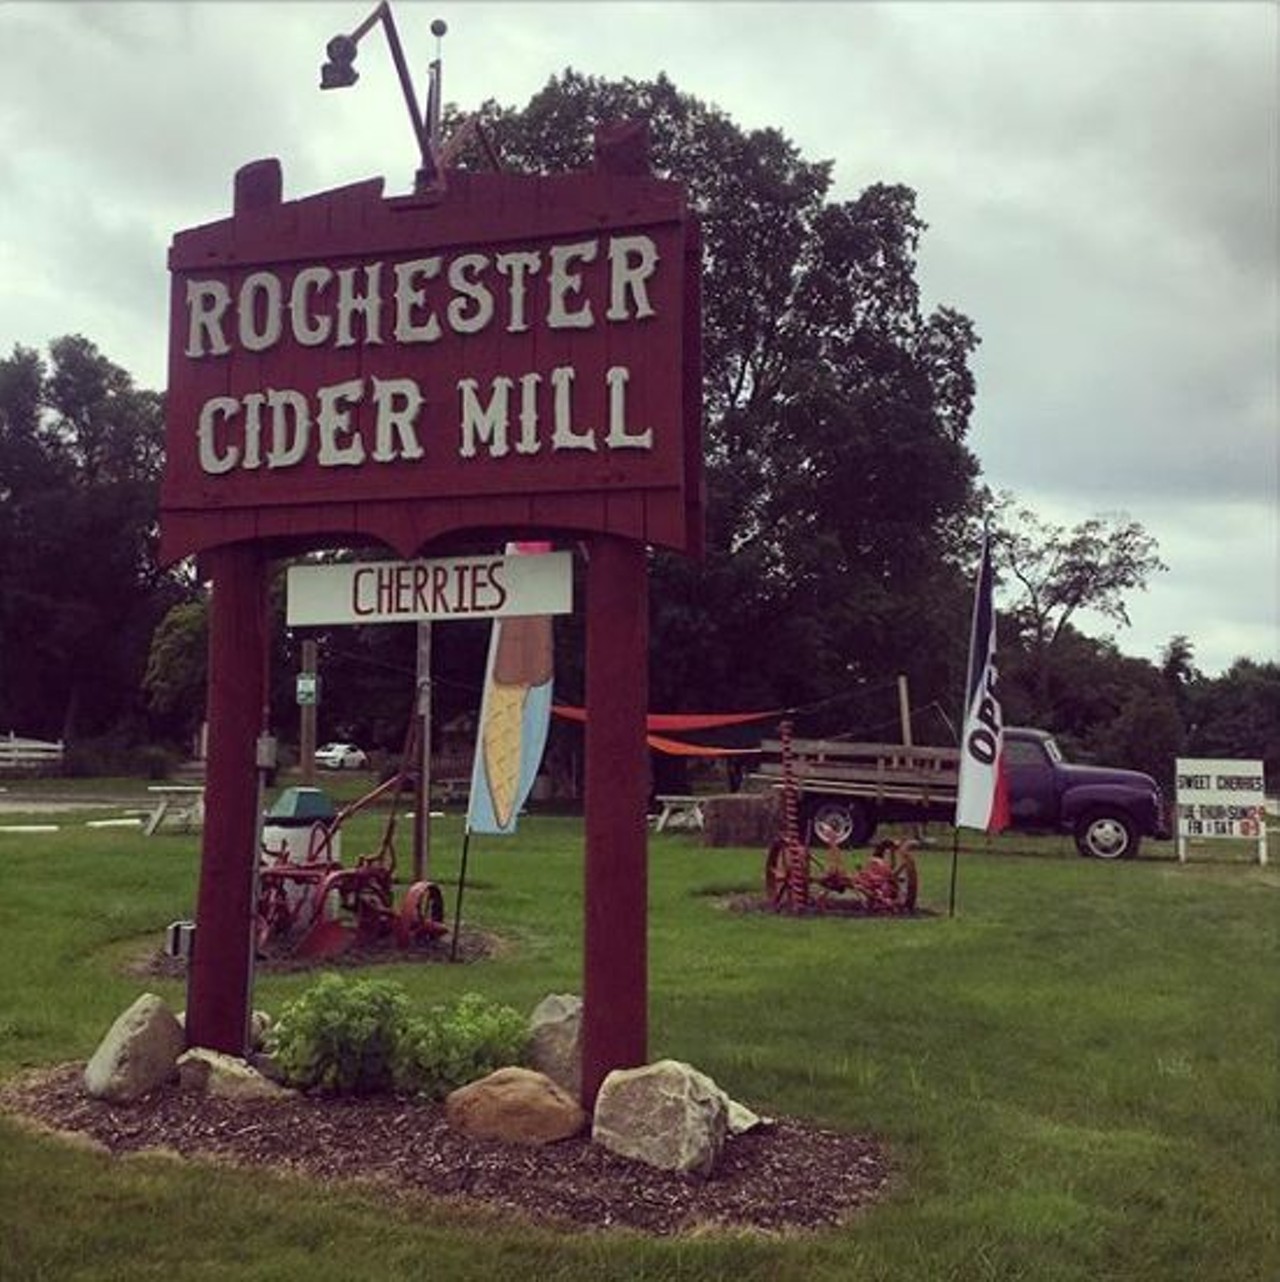 Rochester Cider Mill 
5125 N. Rochester Rd., Rochester; 248-651-4224; rochestercidermill.com
The Barkham family is celebrating the 31st year of their cider mill which claims their cider is &#147;never the same from week to week, except for its excellent flavor and taste.&#148; Besides its freshly produced donuts and drinks, they have an assortment of apples and a giant hay climbing pyramid for fun. Photo via @ryannovak29. 